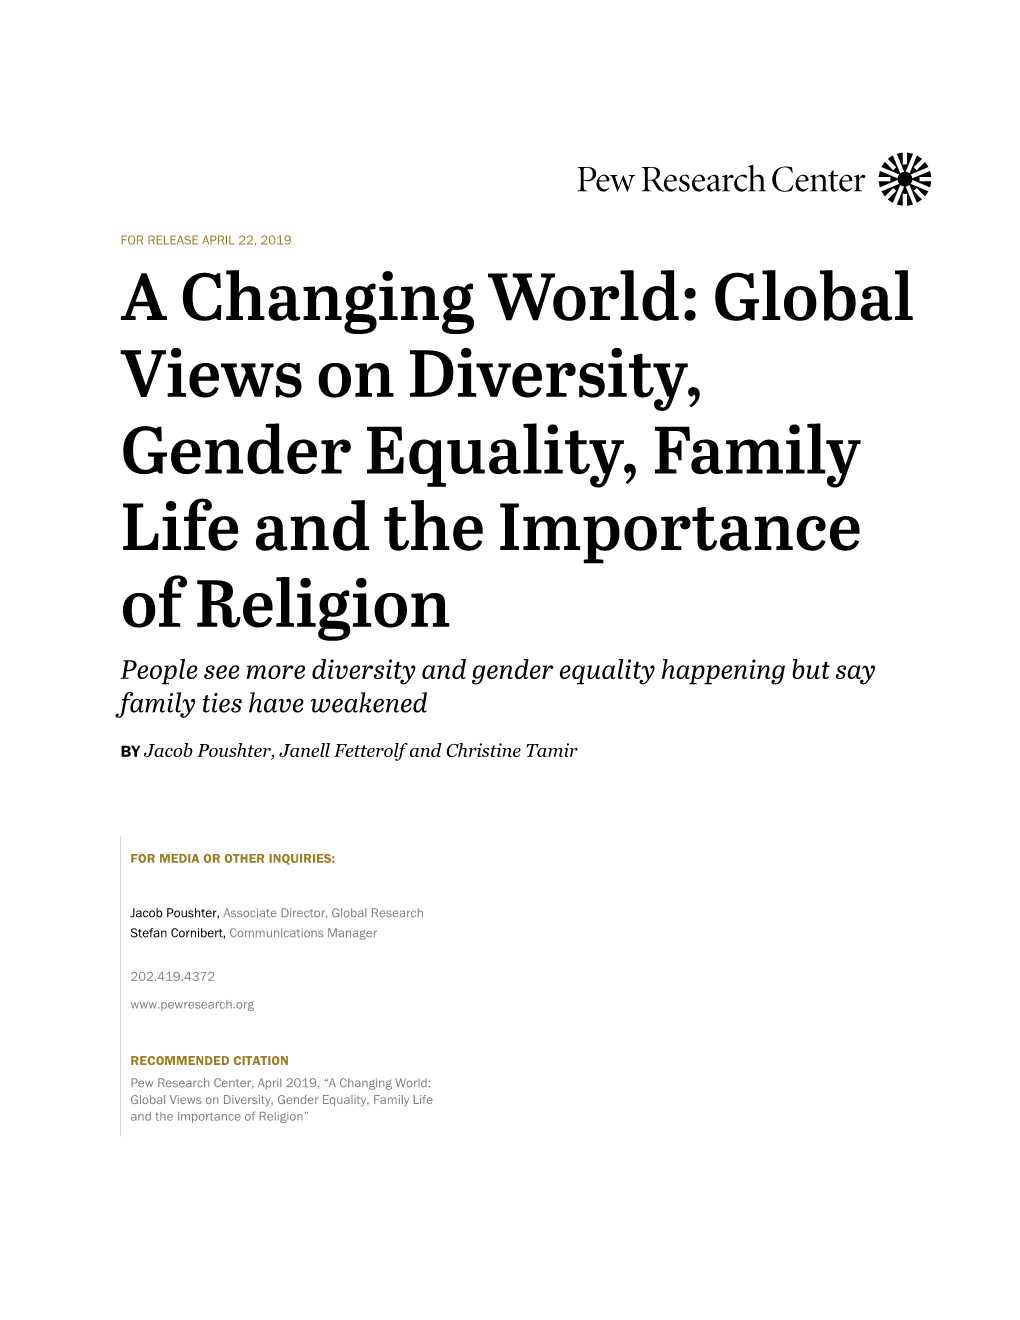 A Changing World: Global Views on Diversity, Gender Equality, Family